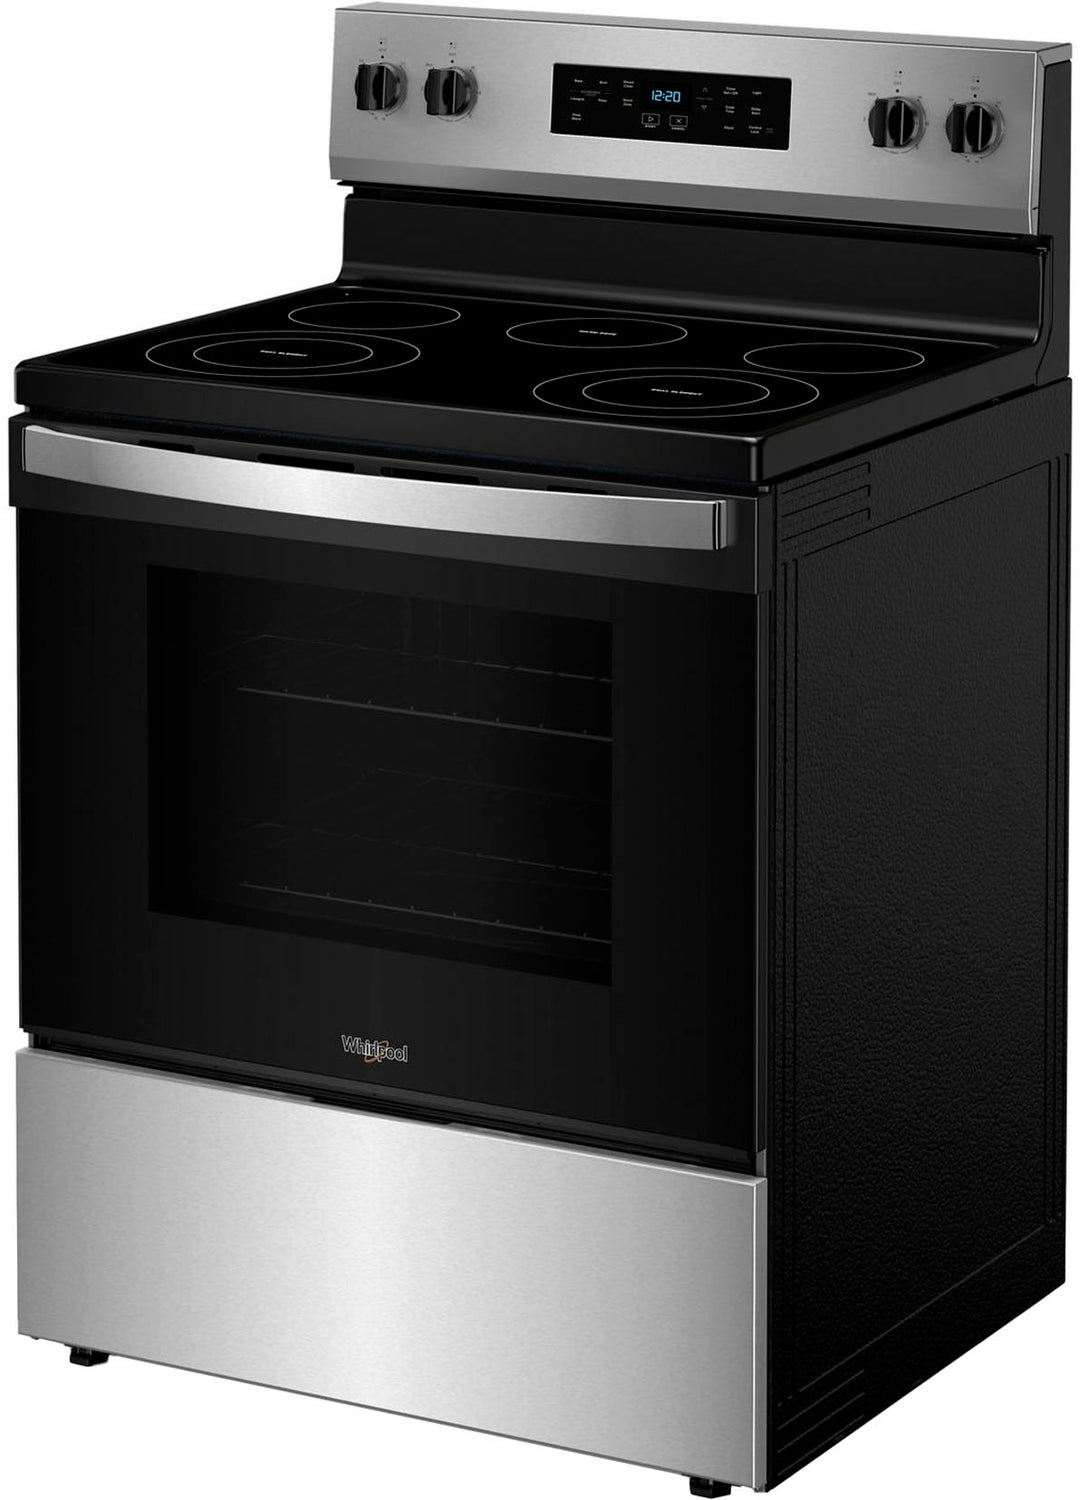 Whirlpool - 5.3 Cu. Ft. Freestanding Electric Range with Cooktop Flexibility - Stainless Steel_3